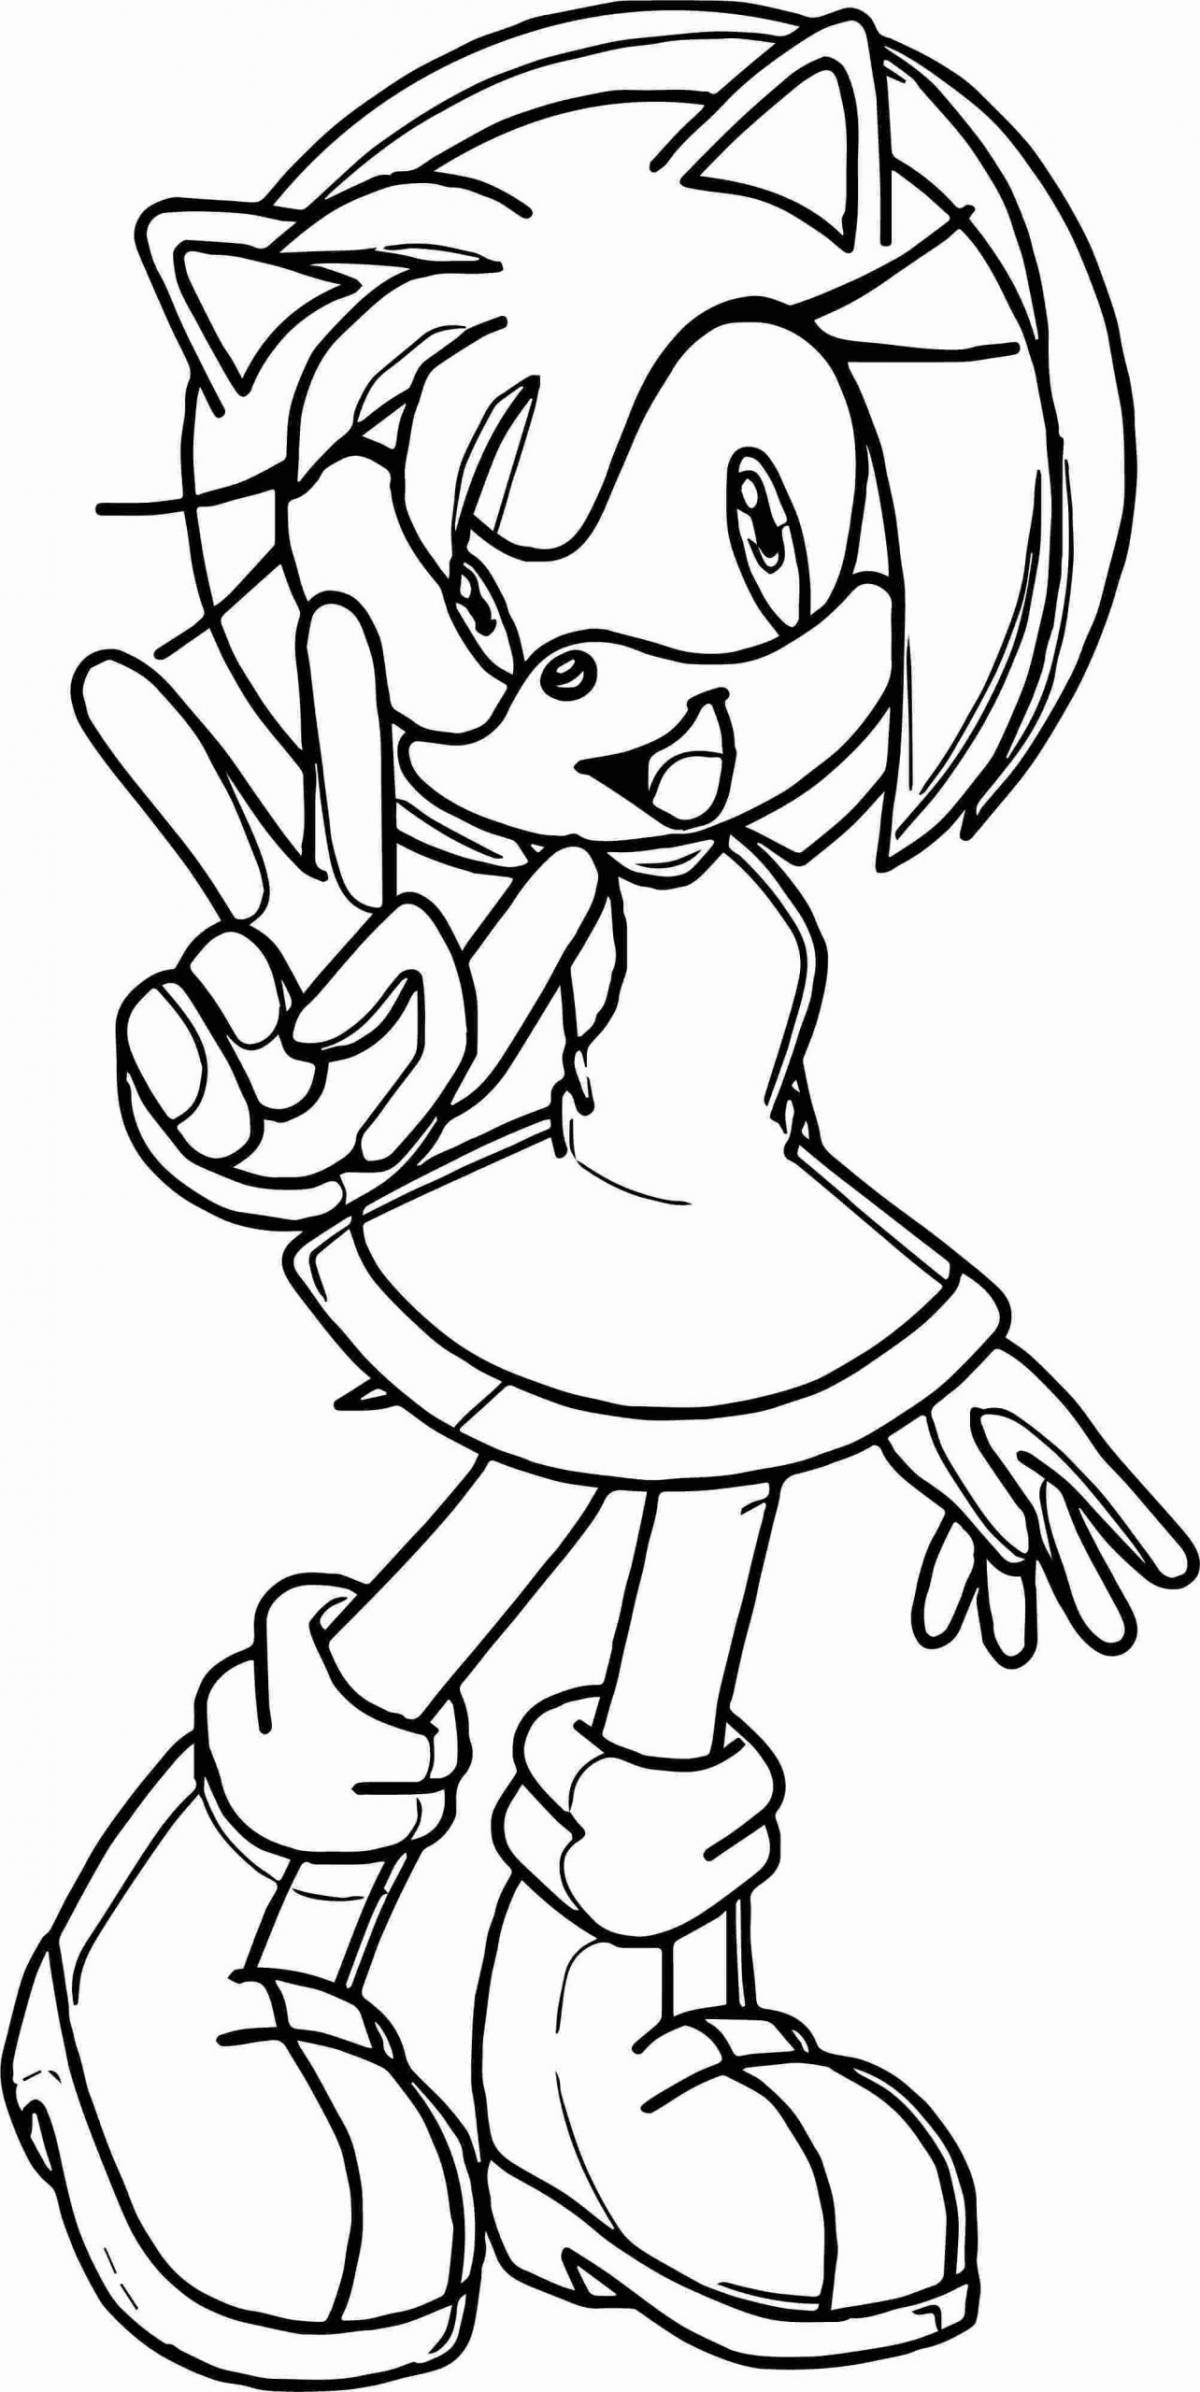 Coloring amy rose filled with color